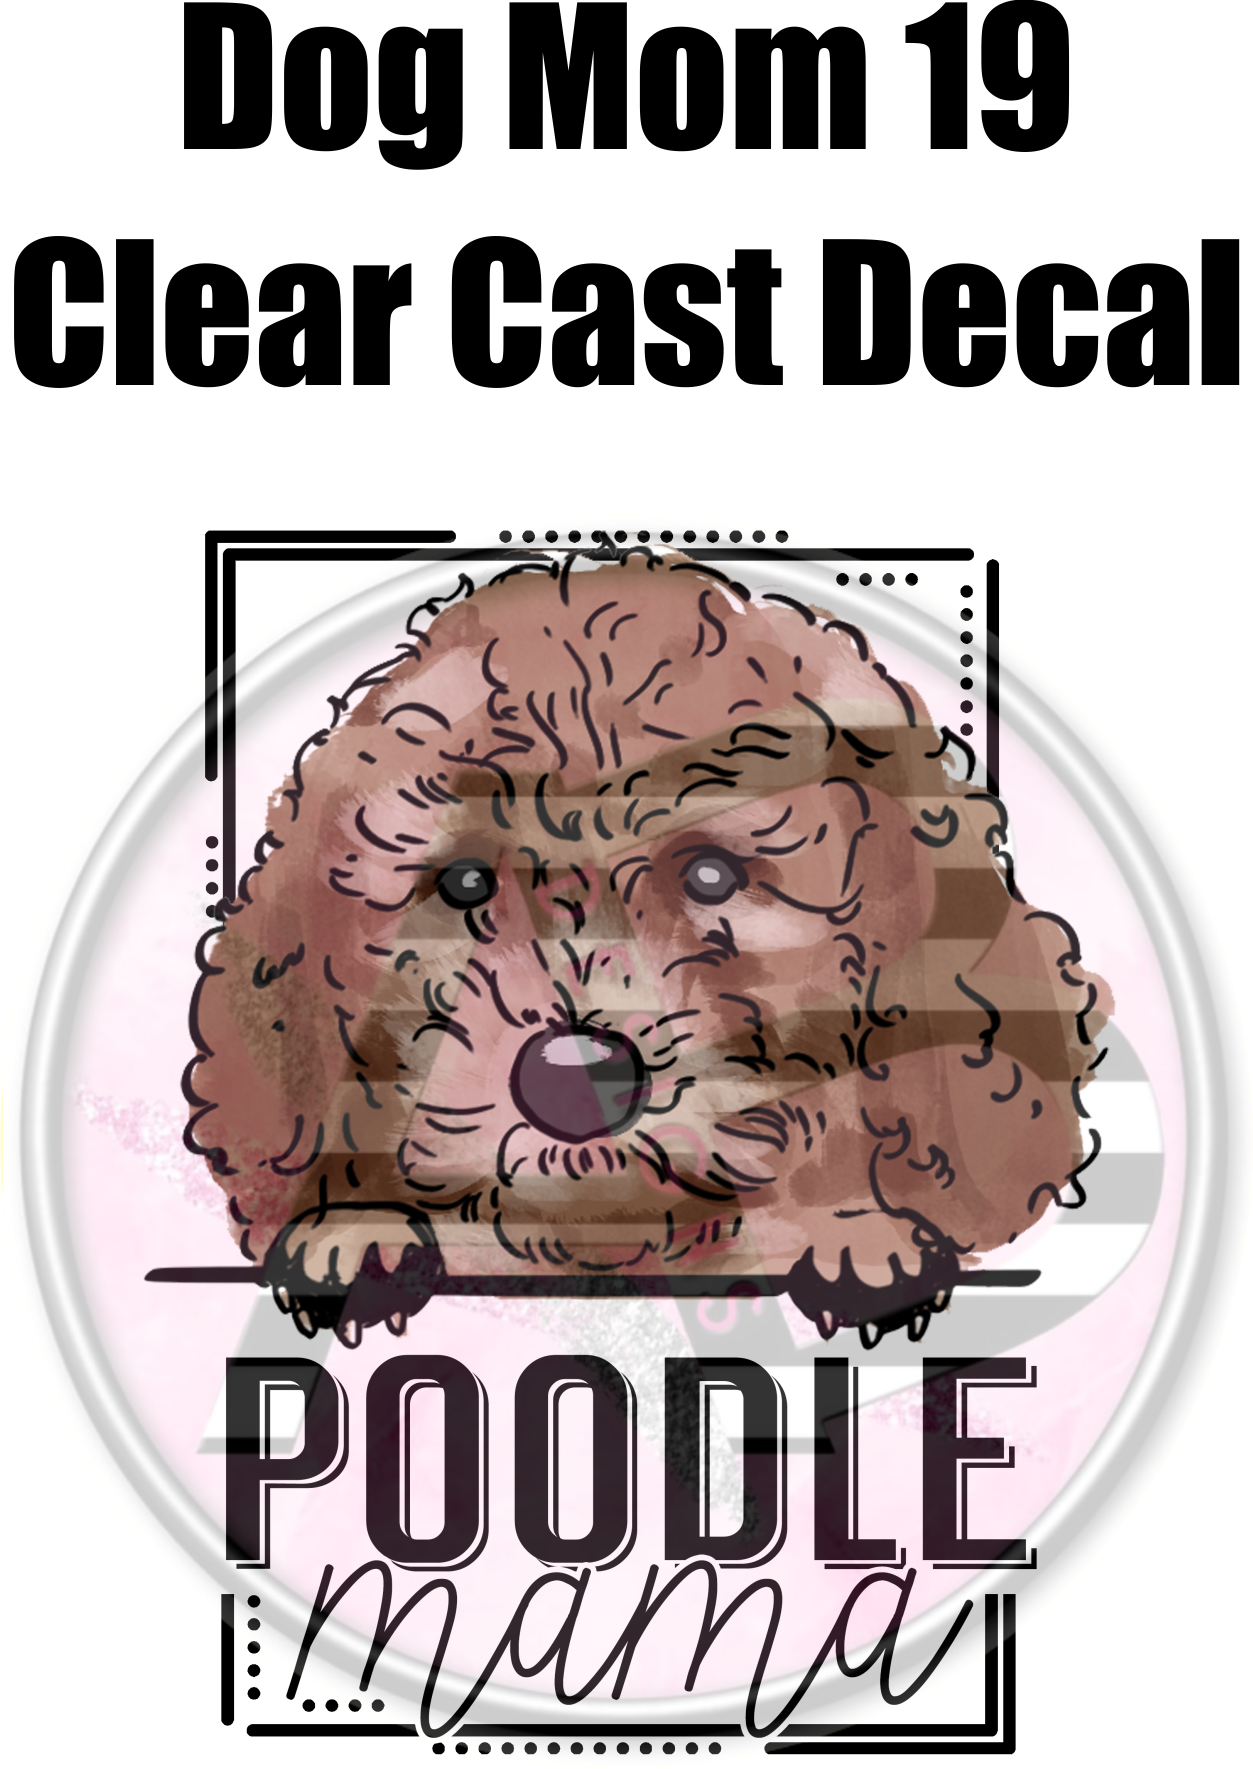 Dog Mom 19 - Clear Cast Decal - 107